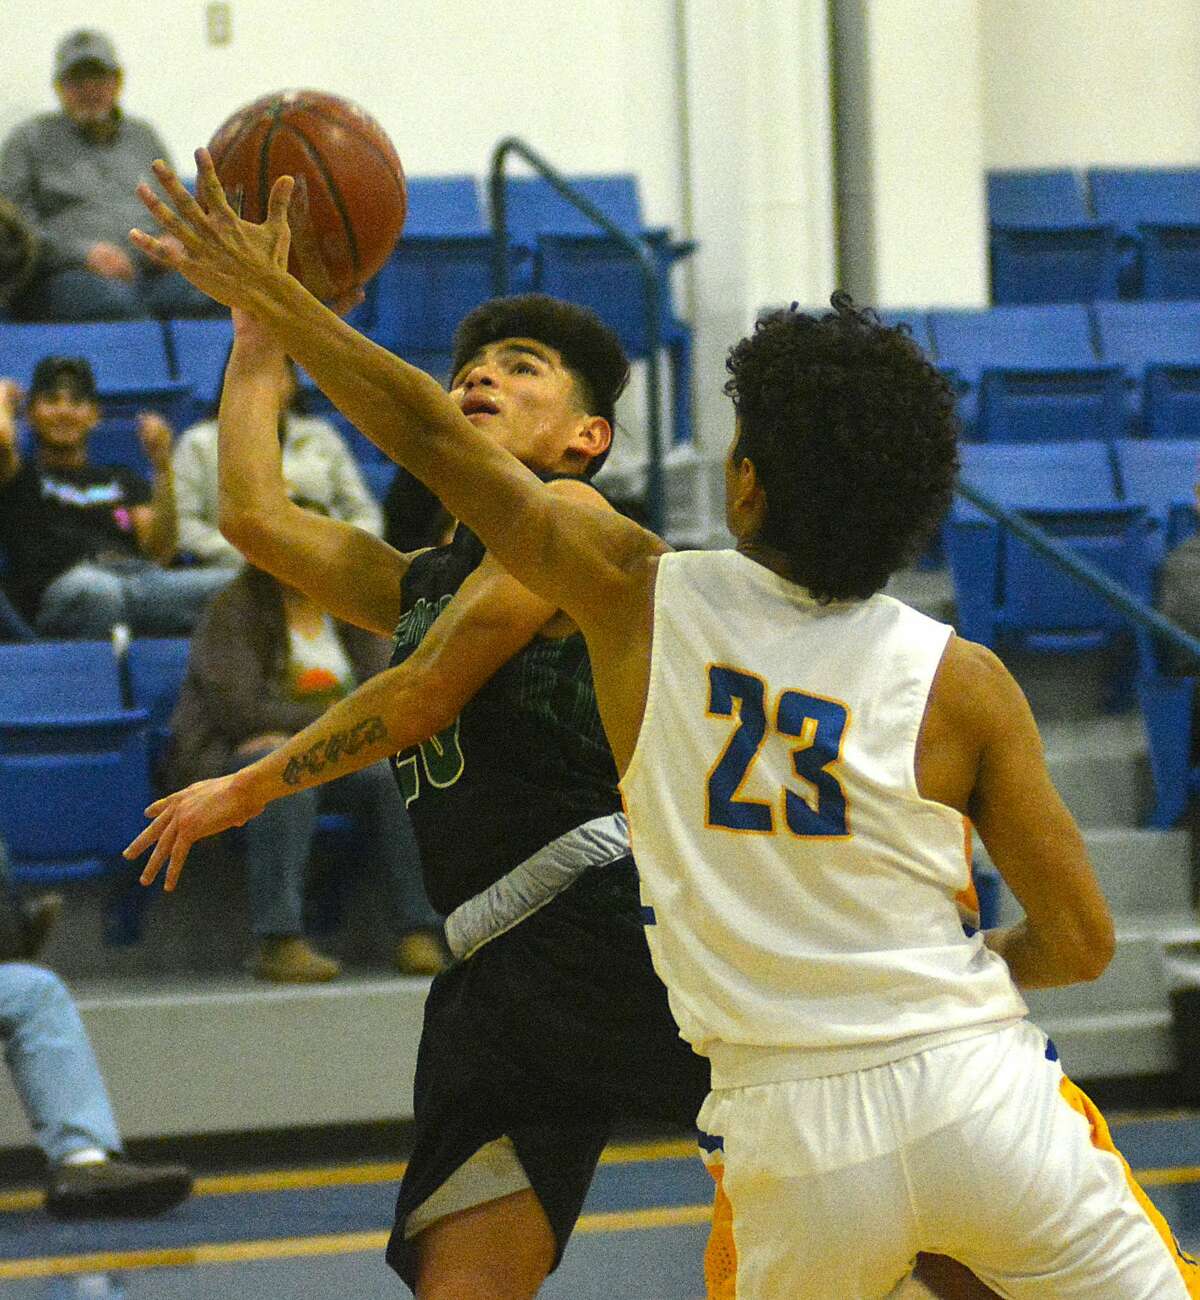 Floydada’s Marcus Perez puts up the shot attempt while being defended by Hale Center’s David Espinosa during their District 4-2A boys basketball game on Friday, Jan. 31, 2020 at Hale Center High School.